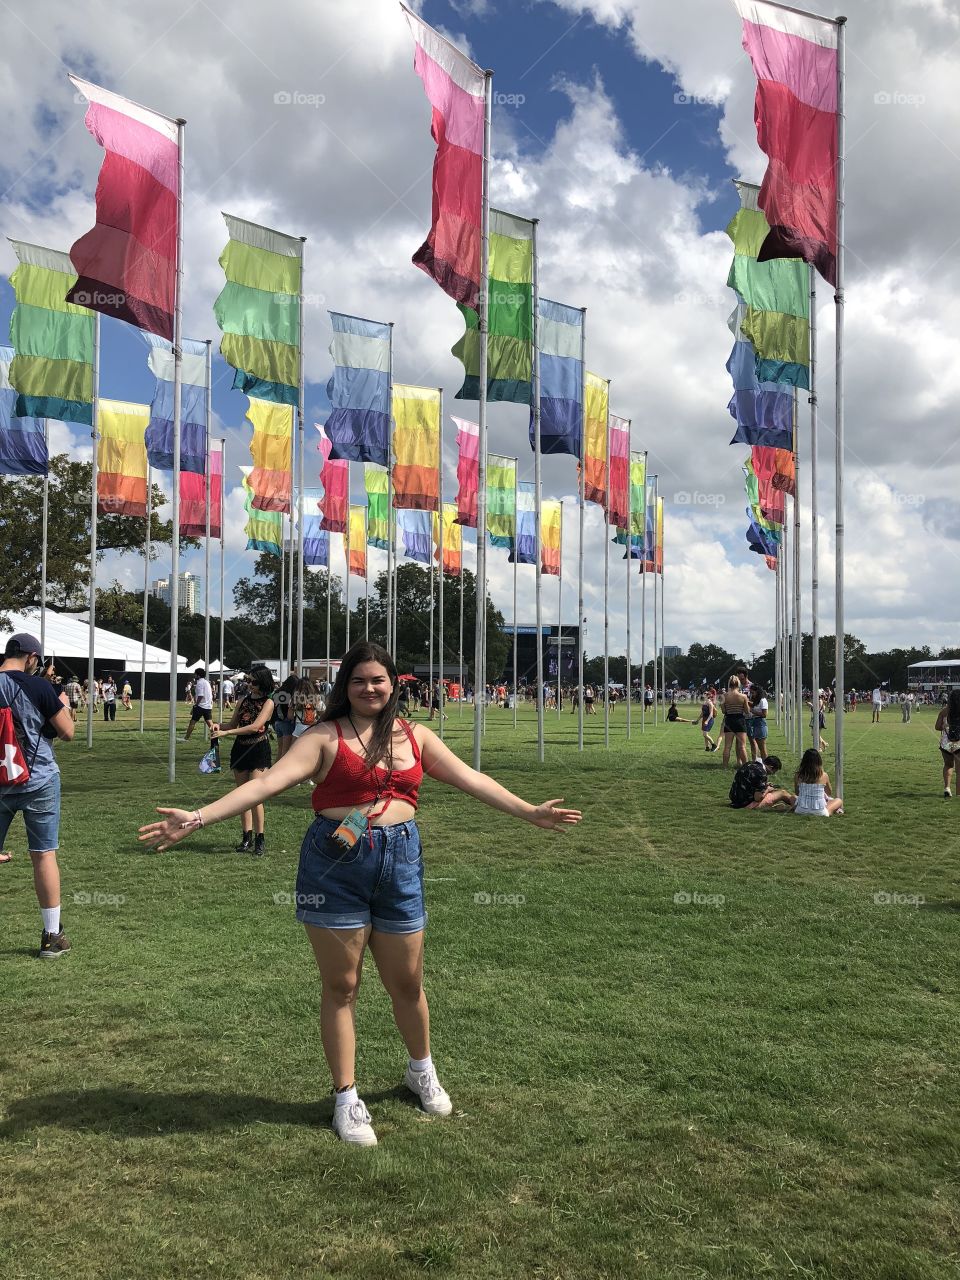 Acl flags